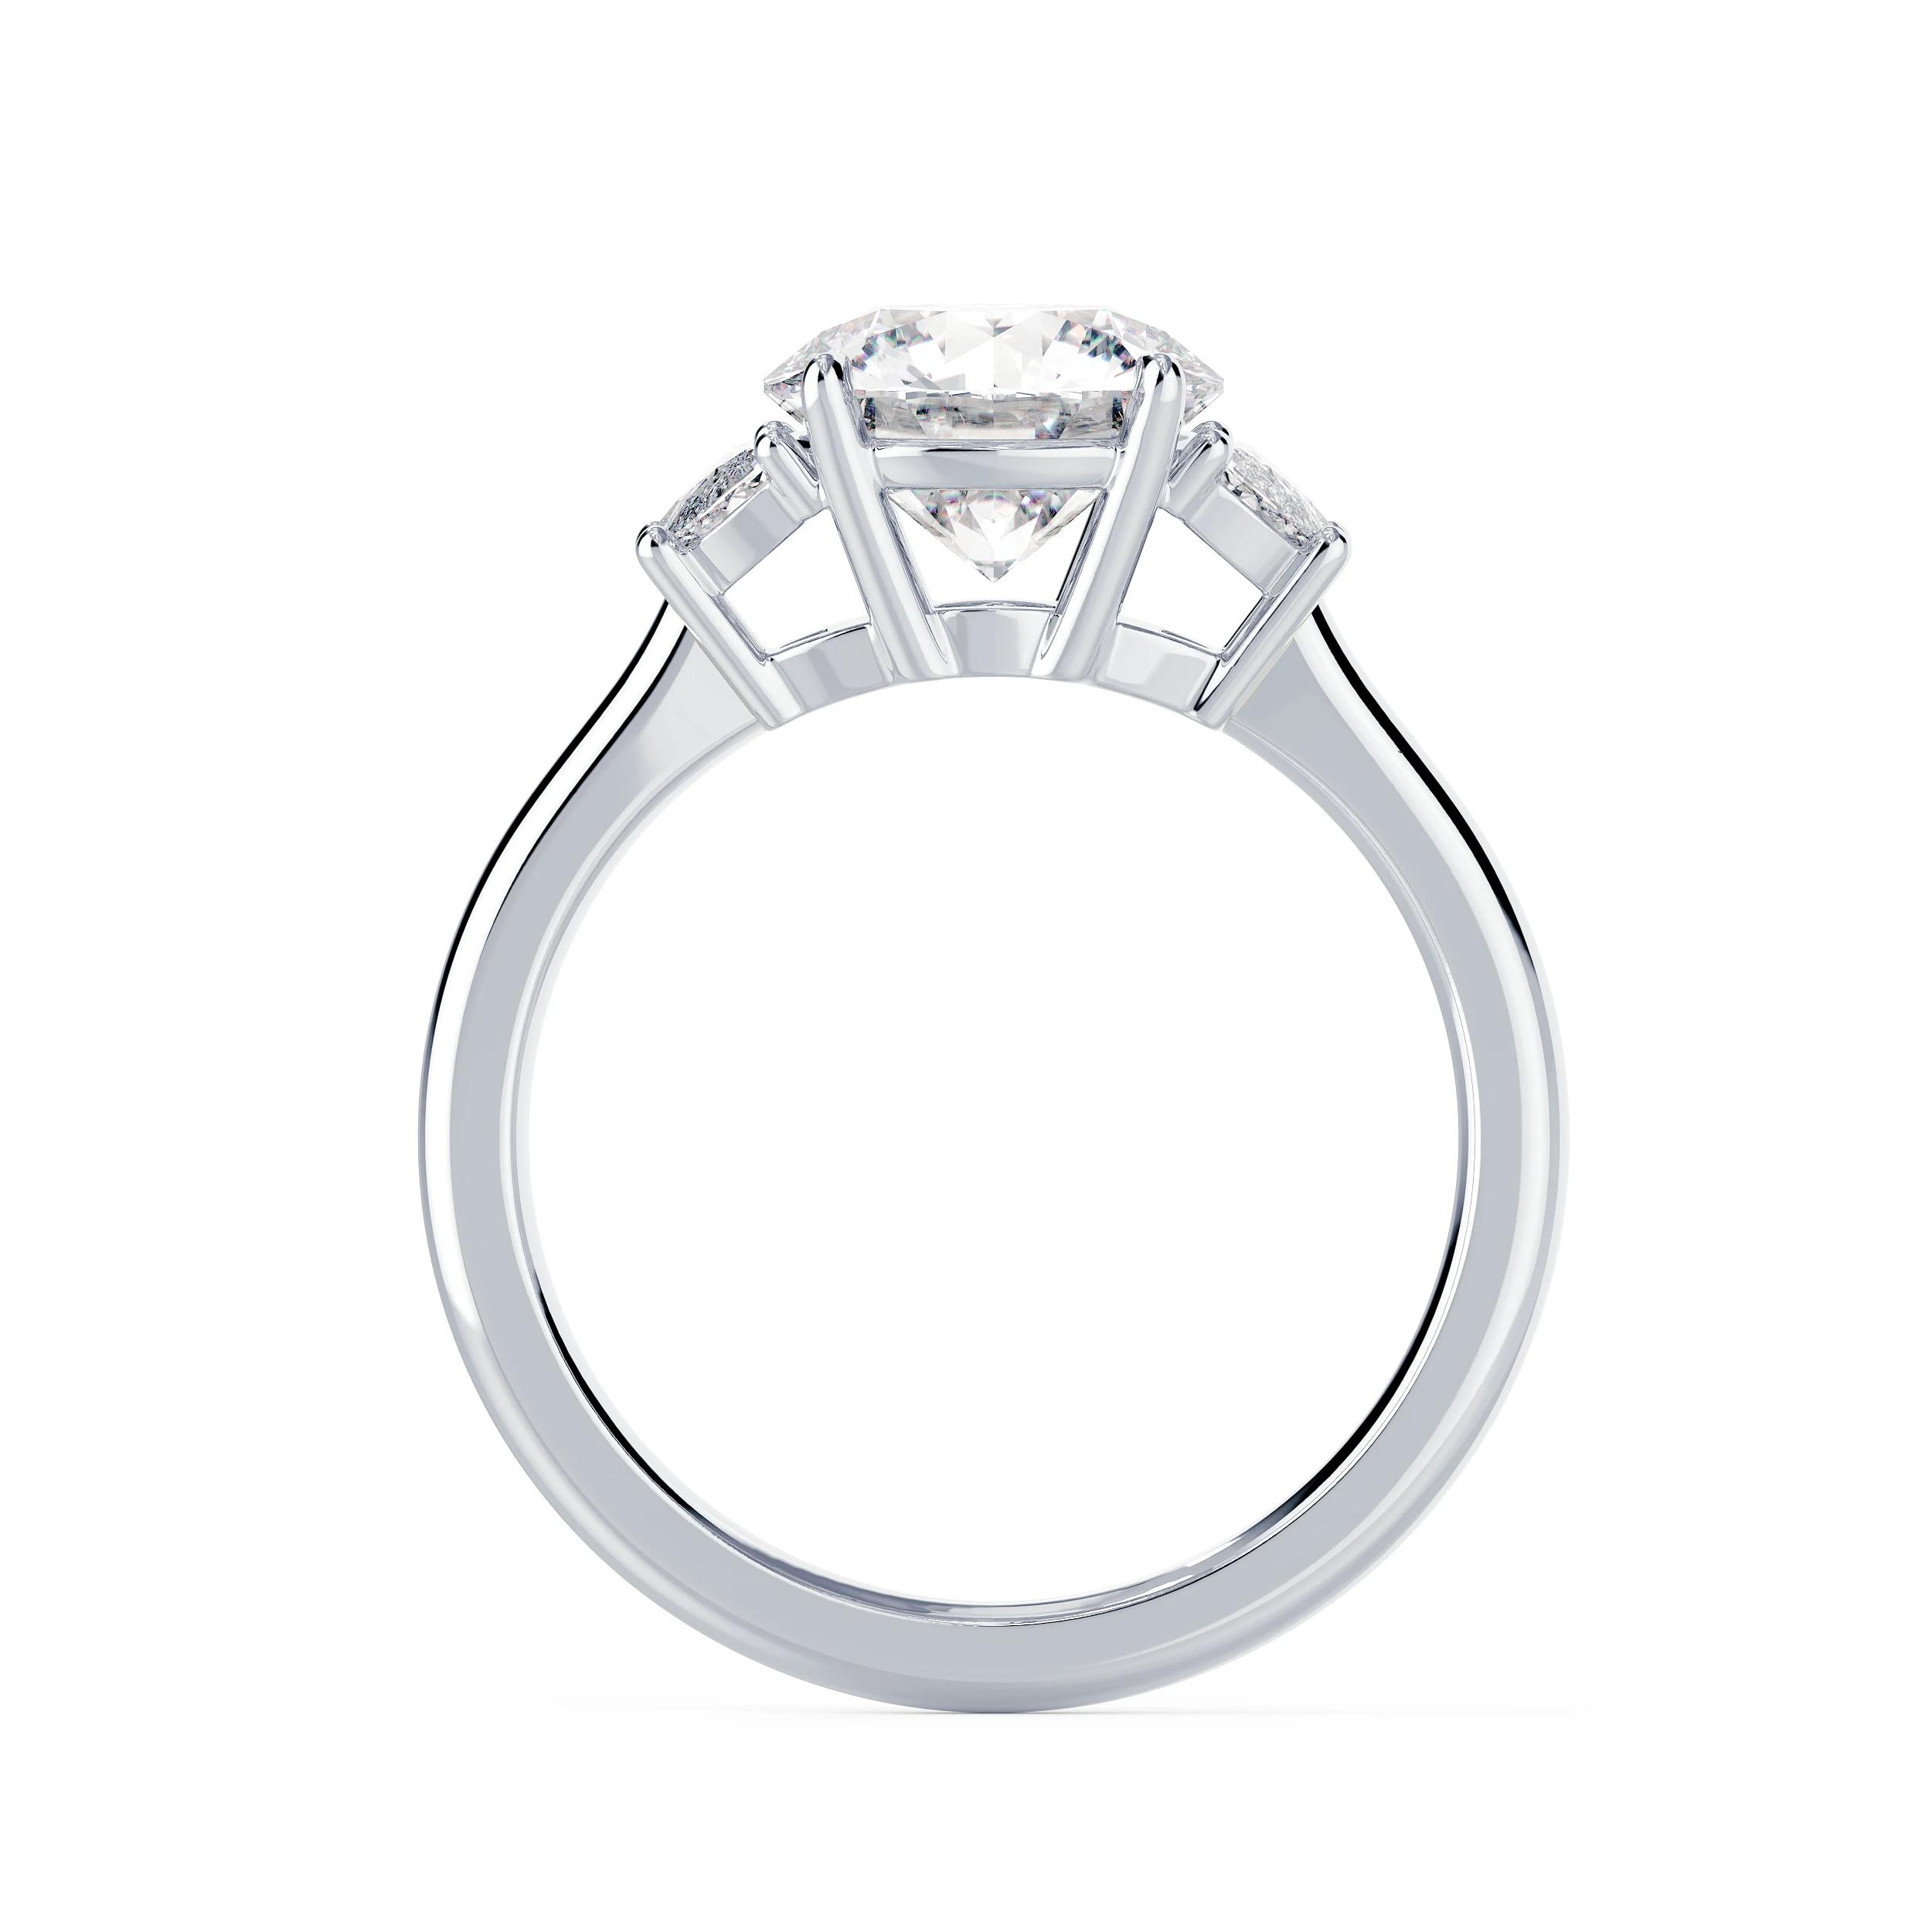 White Gold Round and Half Moon Diamond Engagement Ring featuring Lab Diamonds (Profile View)